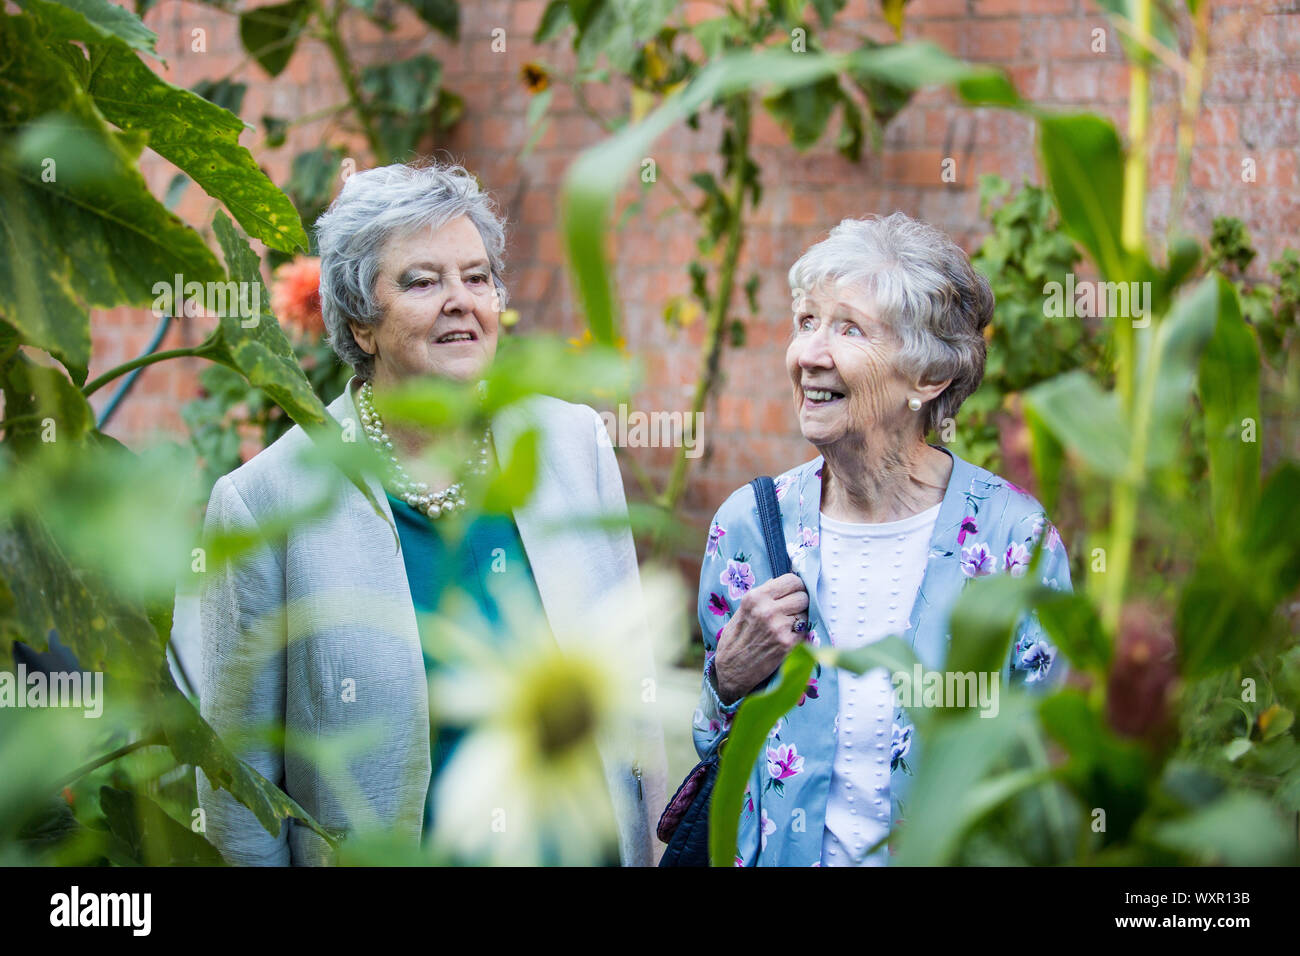 Kidderminster, Worcs, UK. 17th September 2019. 82-year-old Patricia Wallace and 81-year-old Fiona Lygo enjoy the first day of a new sensory garden developed in the grounds of an old disused carpet factory in Kidderminster, Worcestershire. The town was once reknowned for its carpet manufacture, but since its decline the factories have become derelict. The sensory garden - developed by Simply Limitless Wellbeing Centre - has scent and tactile elements. Credit: Peter Lopeman/Alamy Live News Stock Photo